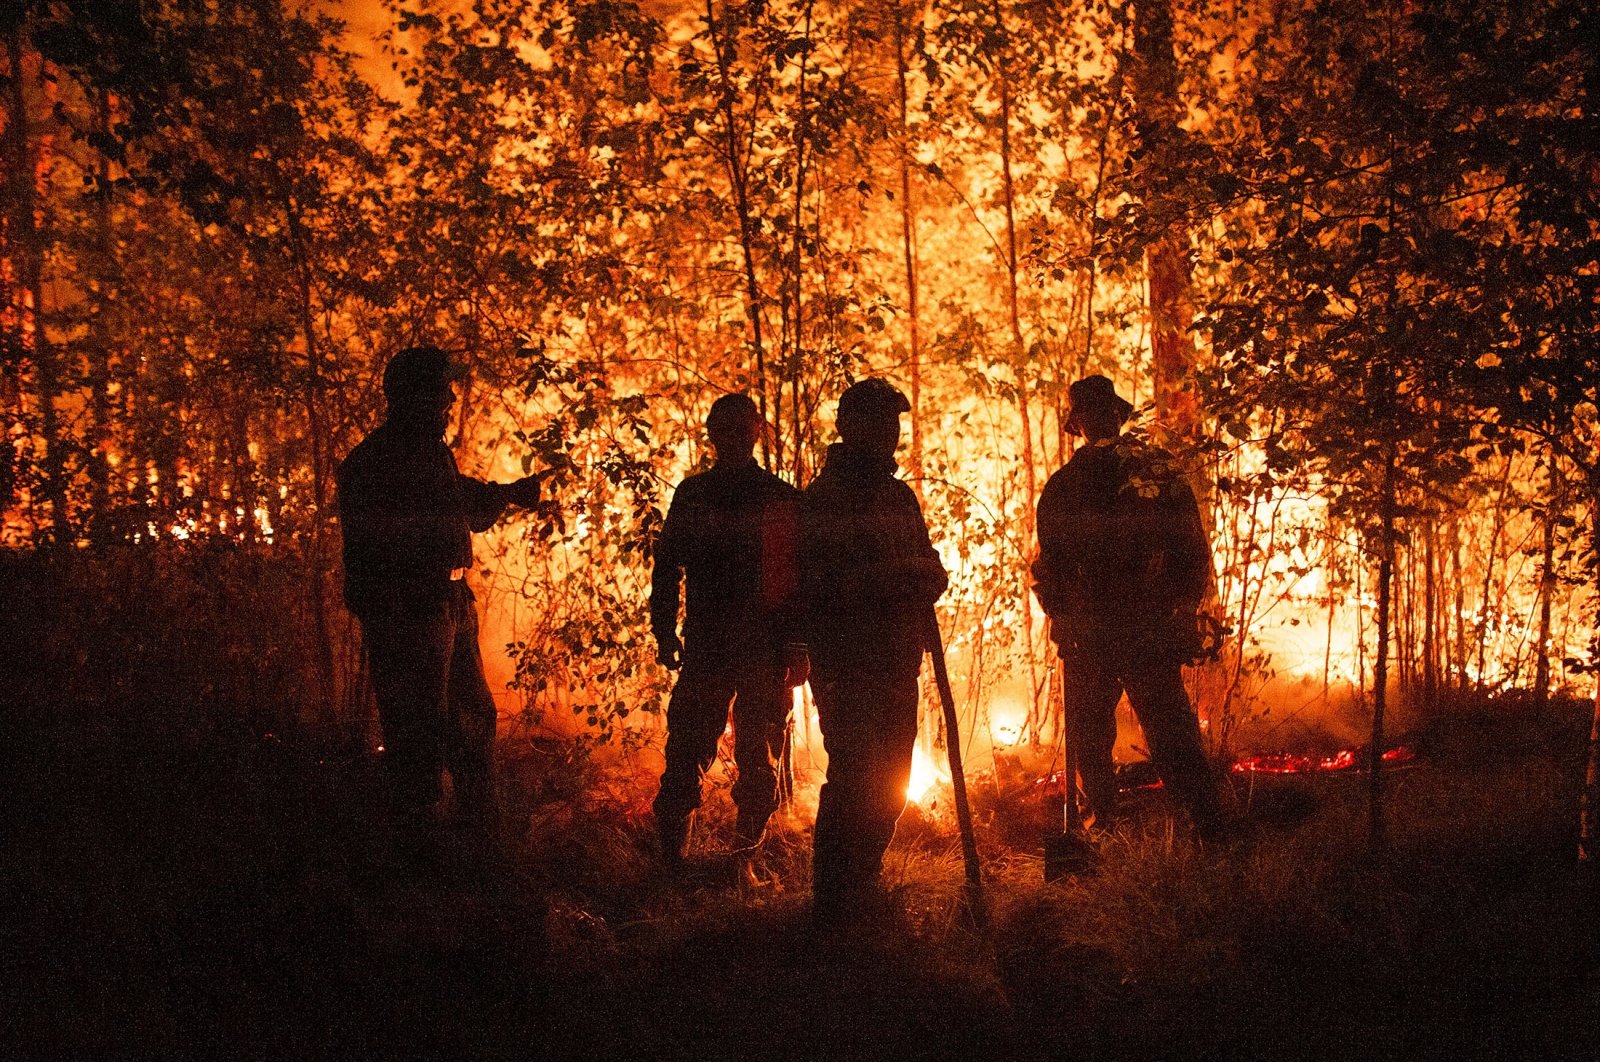 Firefighters work at the scene of a forest fire near Kyuyorelyakh village at Gorny Ulus area, west of Yakutsk, in Russia, Aug. 5, 2021. (AP Photo)